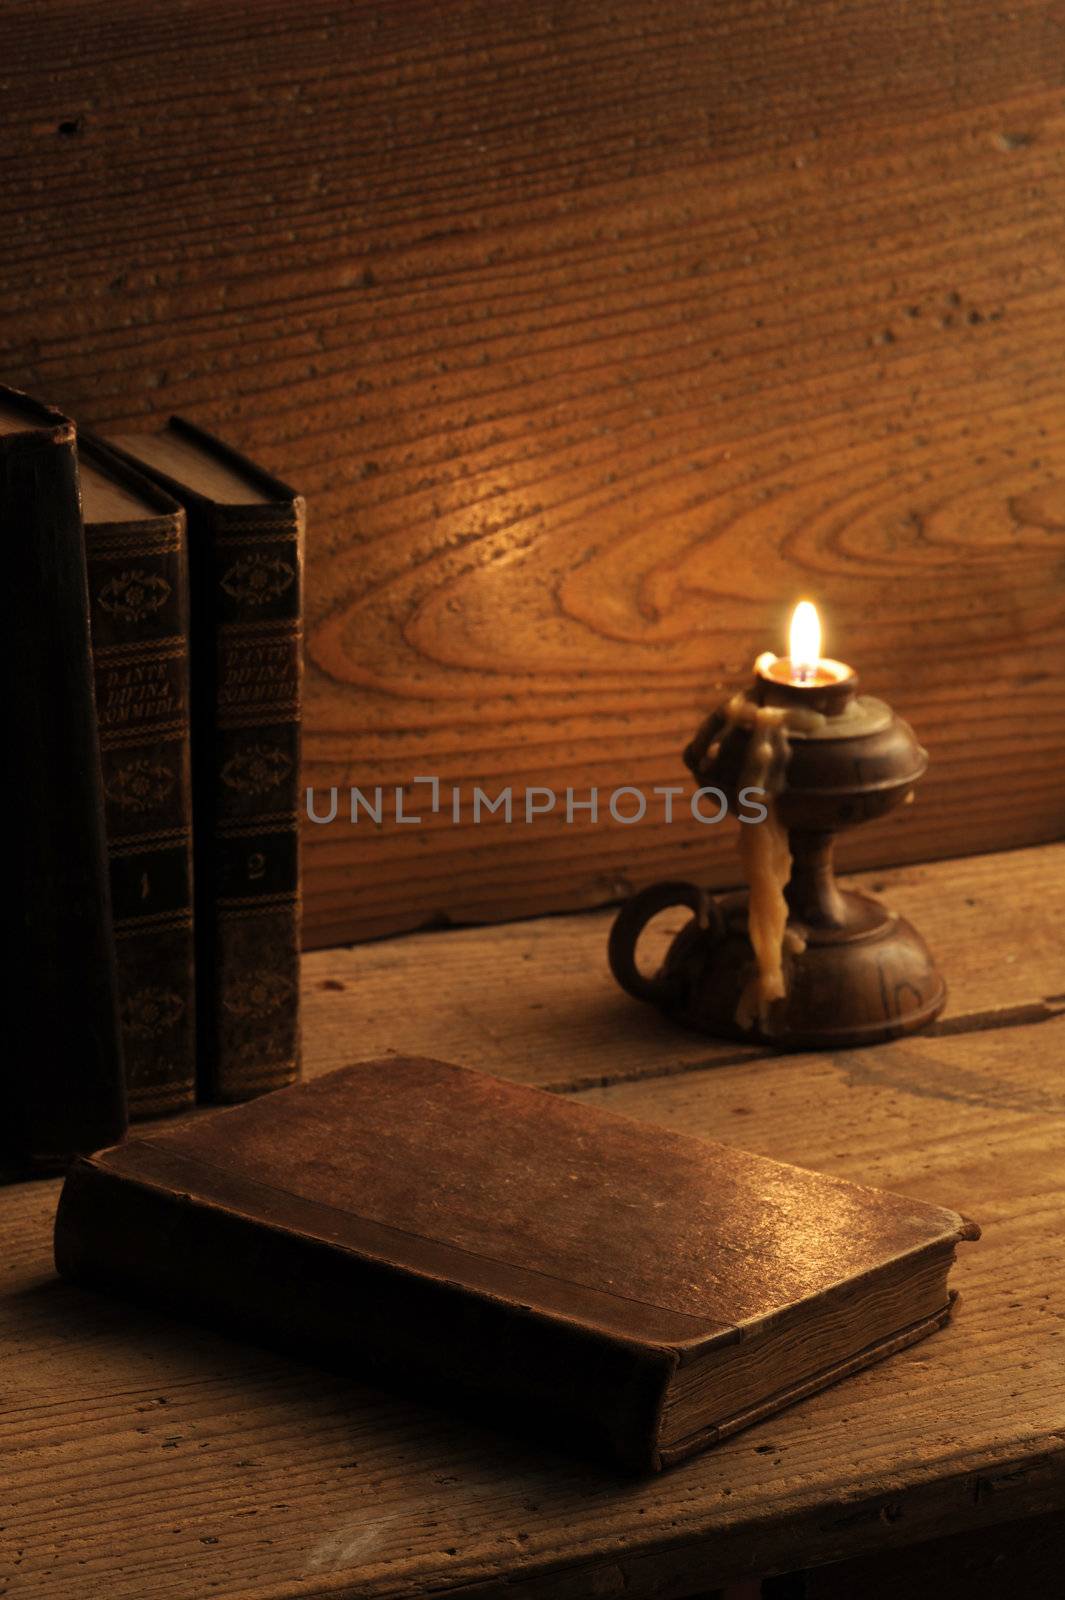 old book on a wooden table by candlelight by stokkete